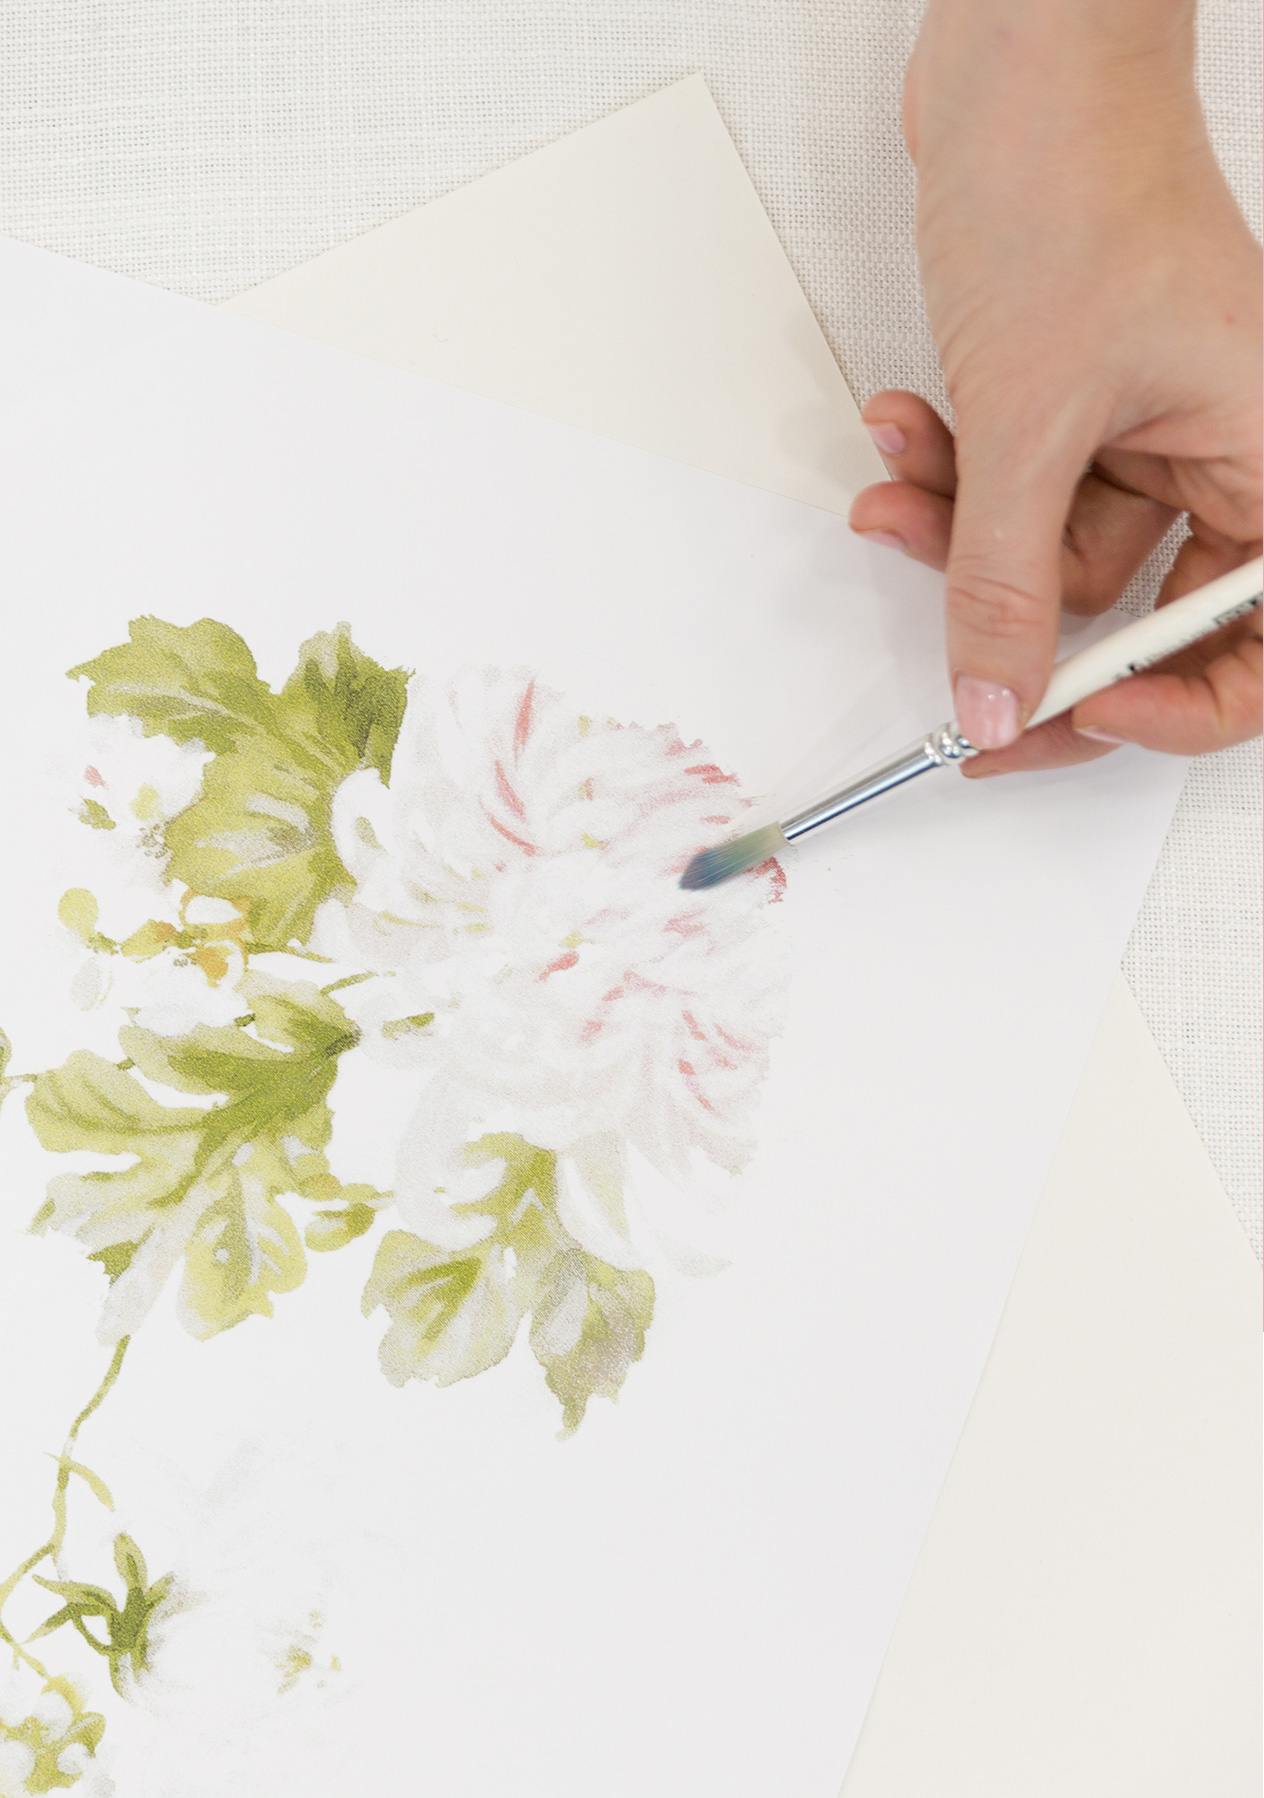 Stay creative during lockdown, an image of a watercolour floral 